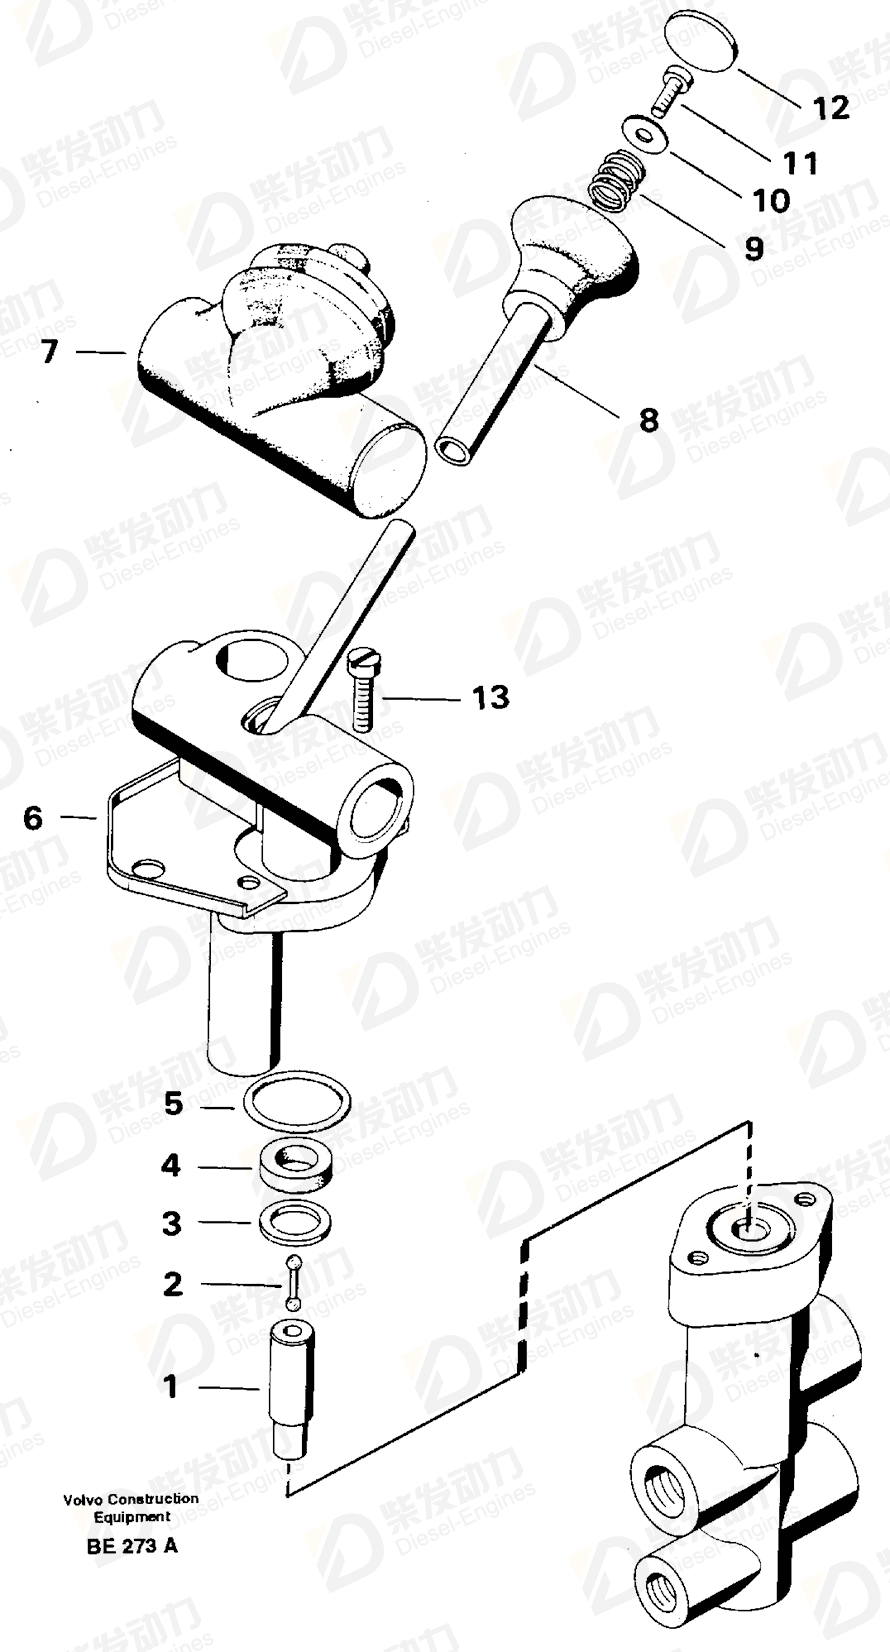 VOLVO Oil seal ring 11991826 Drawing